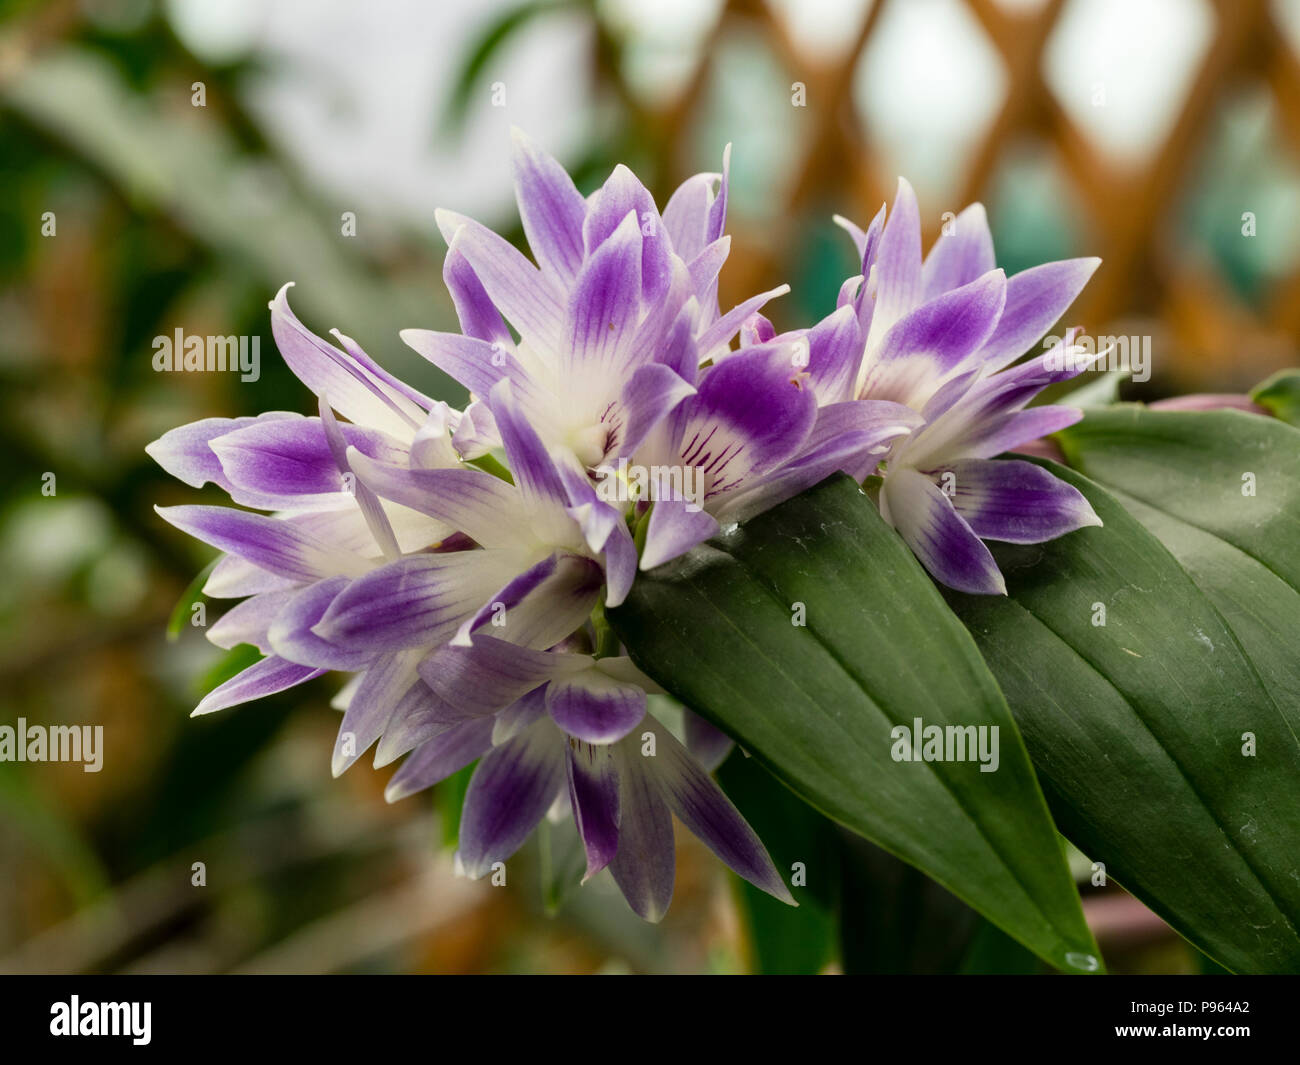 Purple and white flowers of the Phillipinnes native epiphytic orchid, Dendrobium victoriae-reginae Stock Photo